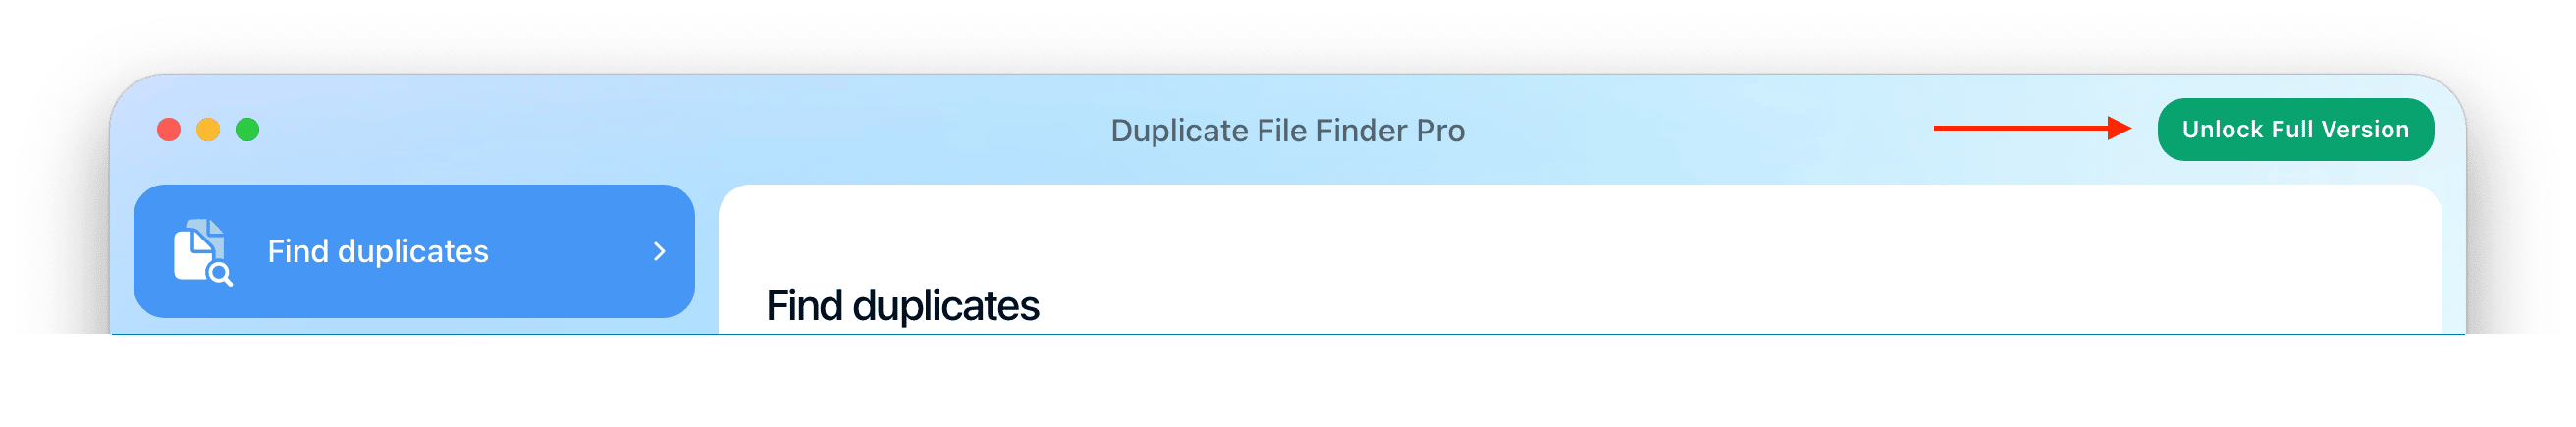 duplicate file finder showing the Unlock Full Version button